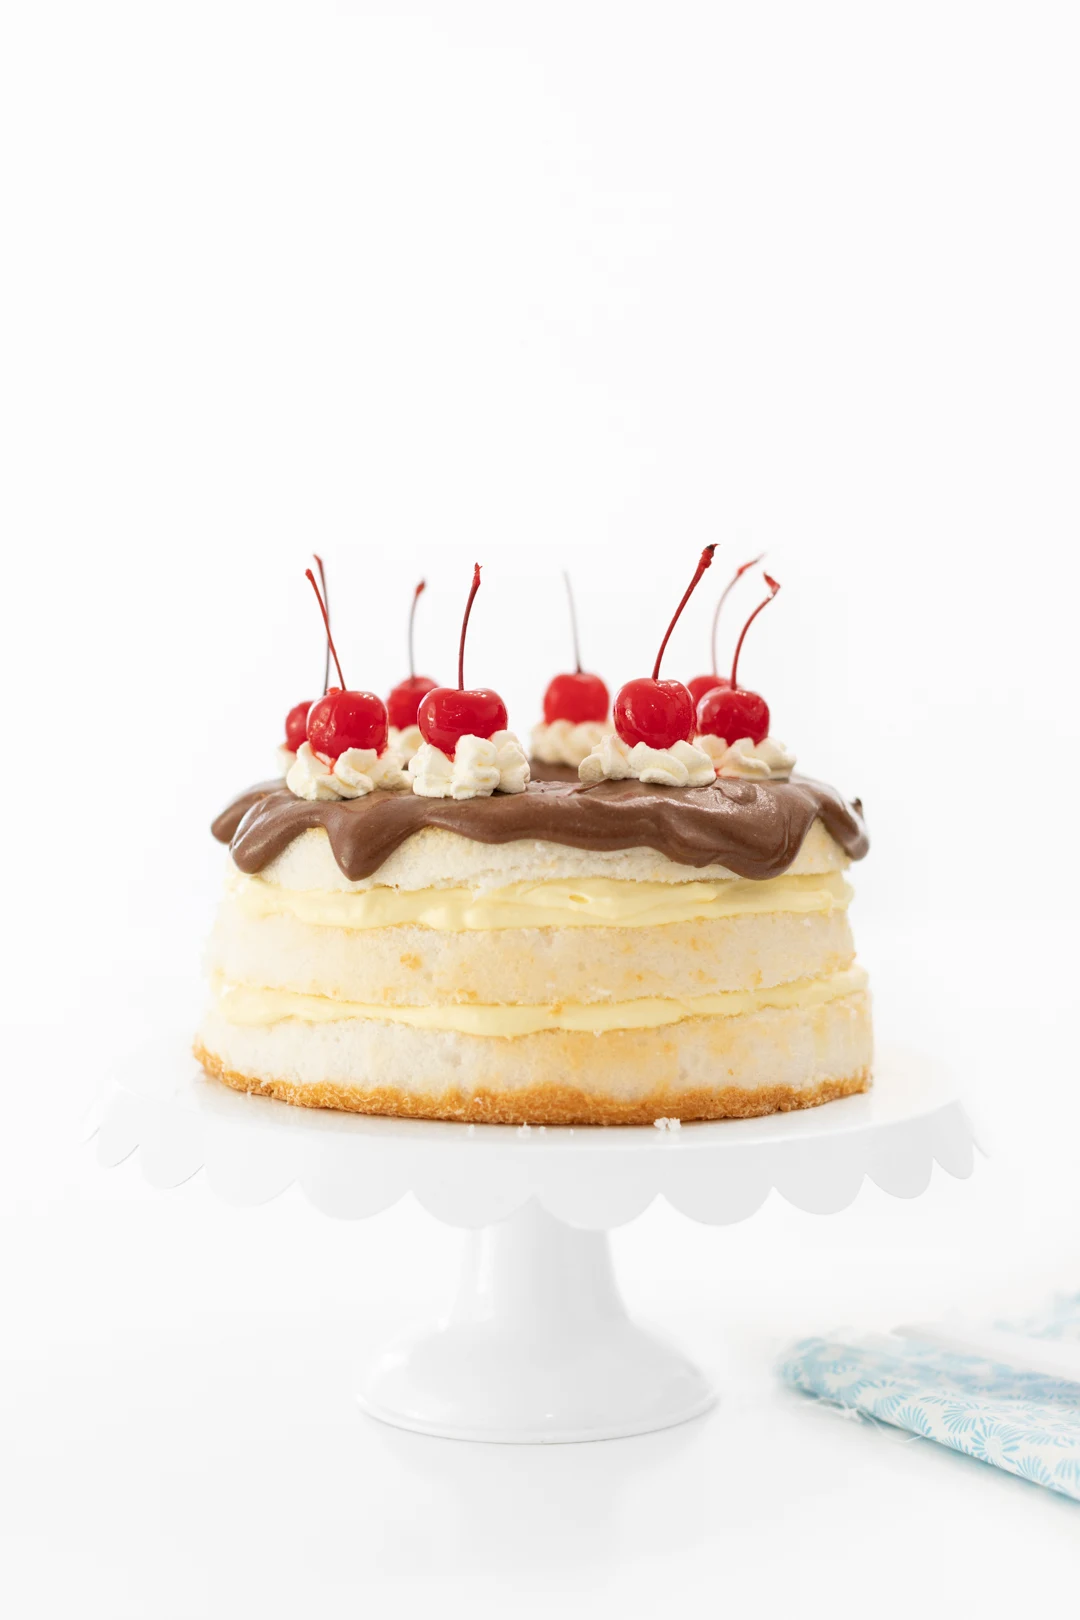 Boston Cream Pie That is Easy To Make. Topped with Cherries.